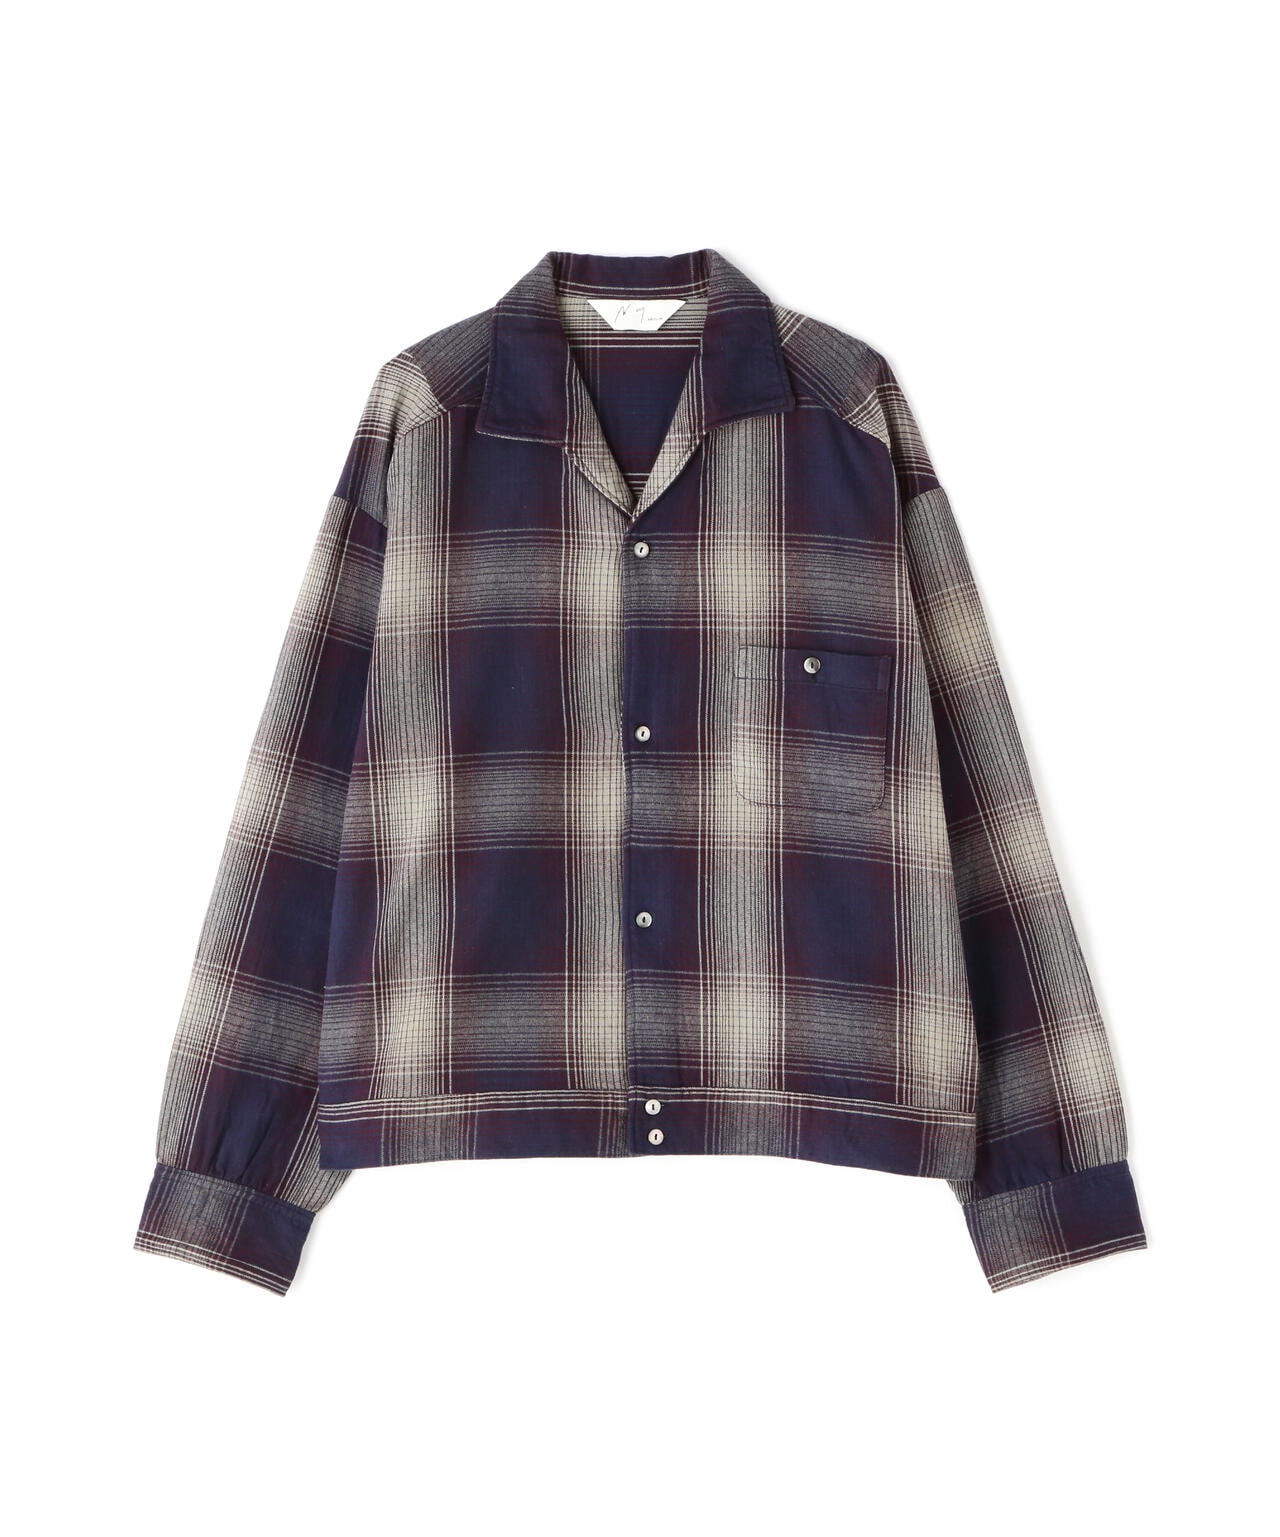 ANCELLM/アンセルム/FLANNEL CHECK SHORT SHIRT JACKET